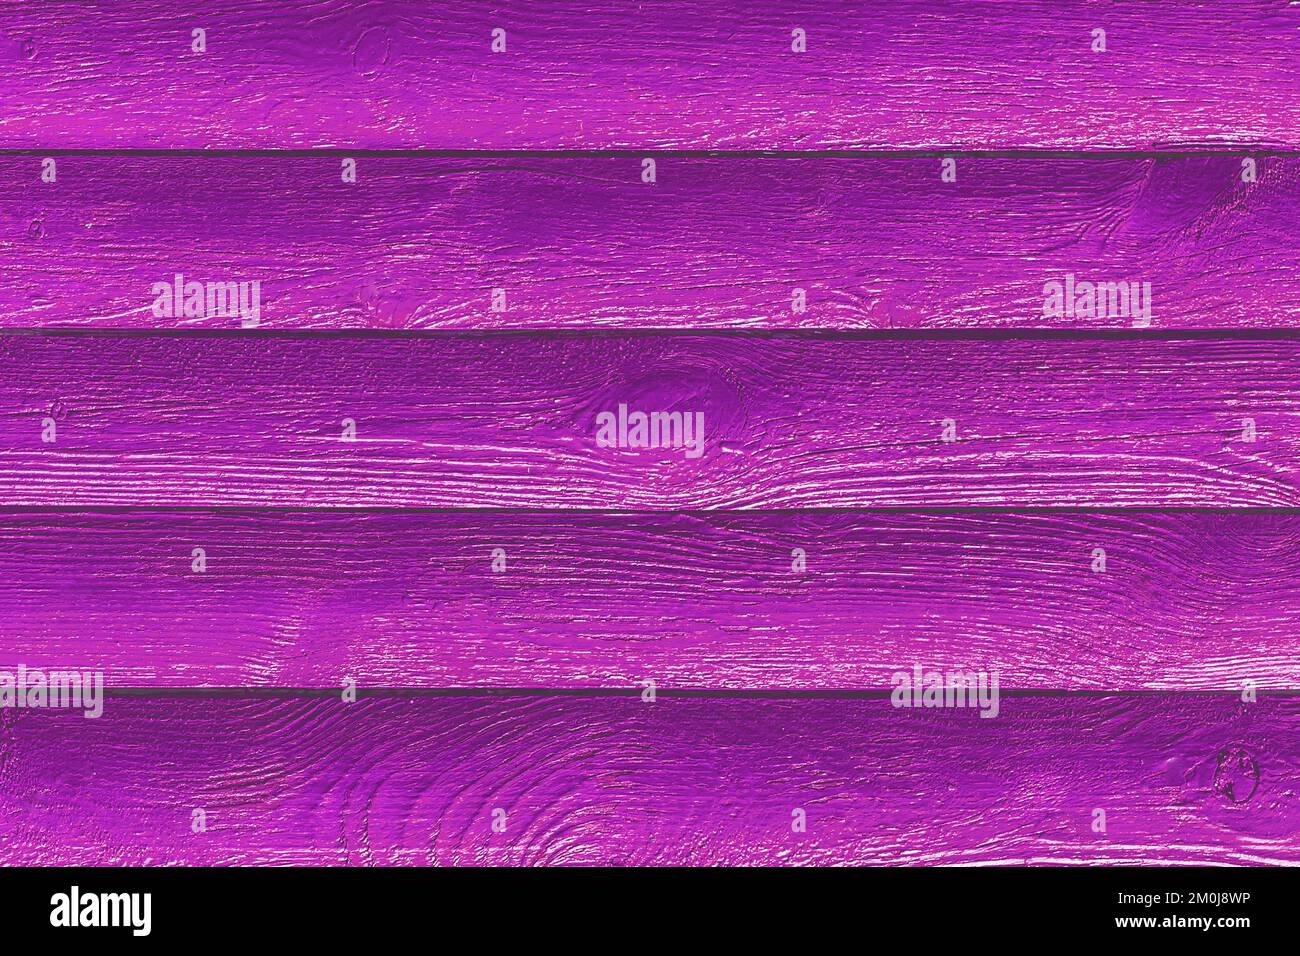 Pink purple paint fence horizontal lines stripes boards surface wooden texture plank background. Stock Photo